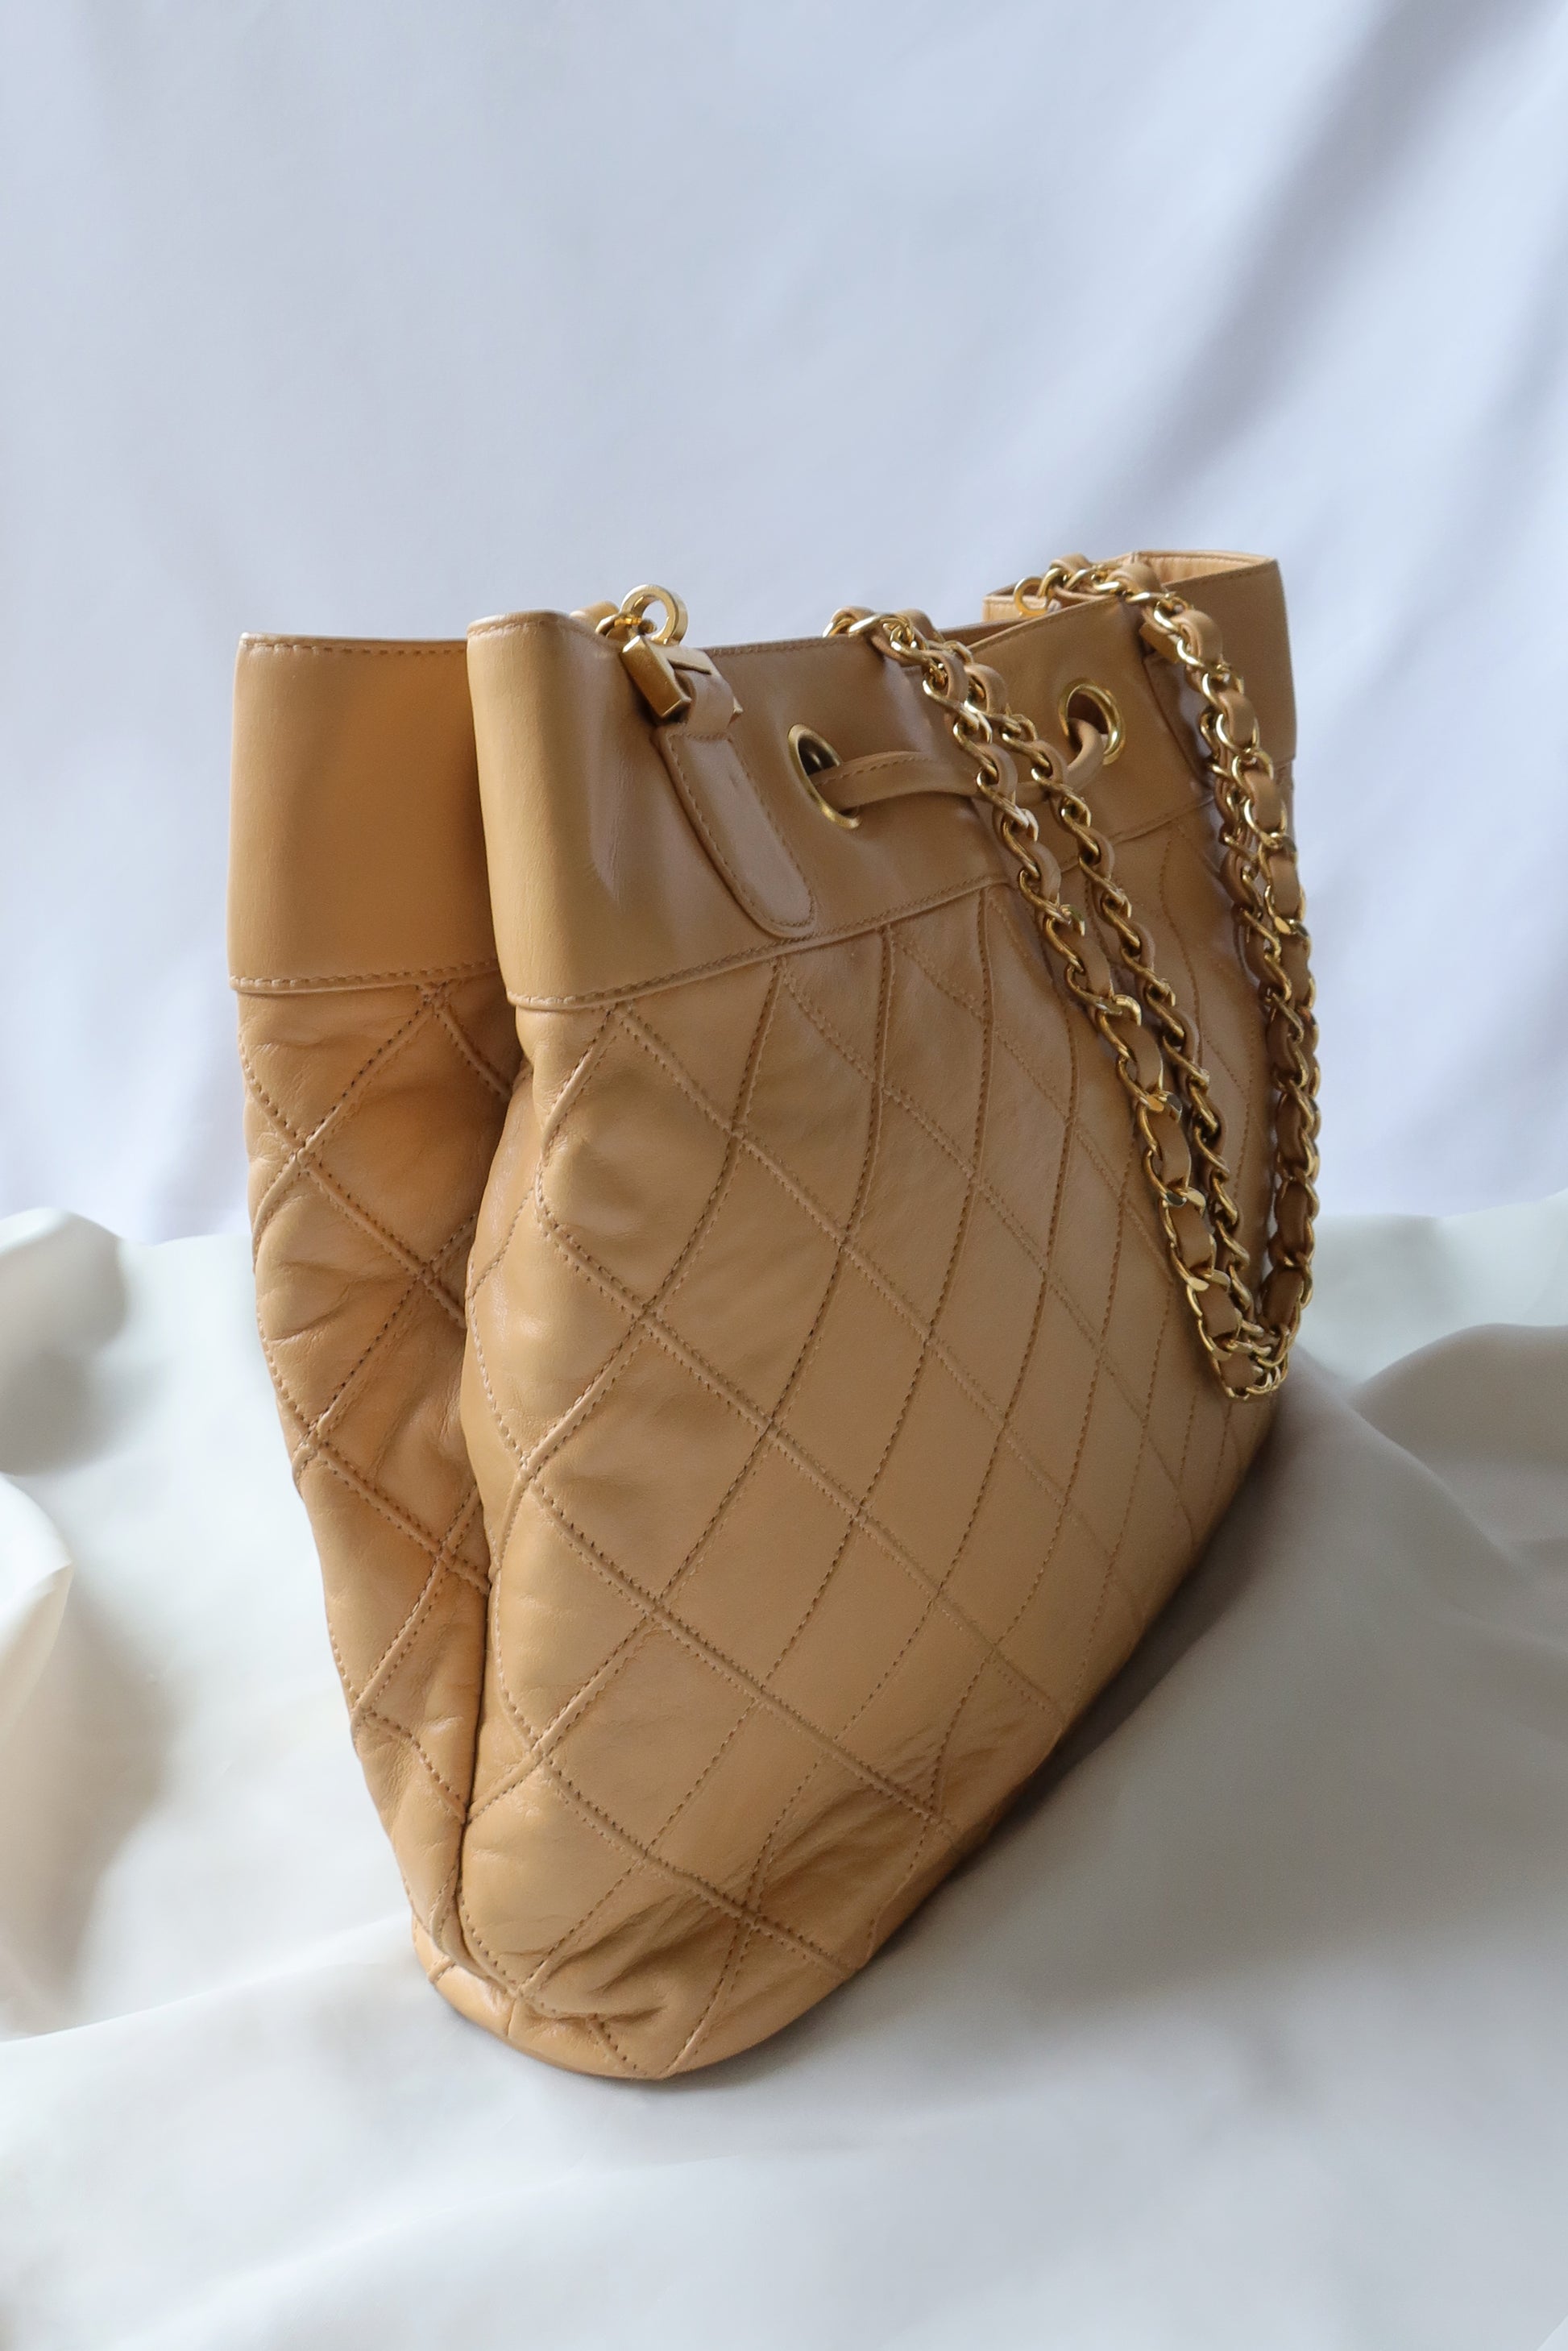 Chanel Vintage Caramel Quilted 24k Gold Double Chain Tote Bag - The Tanpopo  Room - The Tanpopo Room